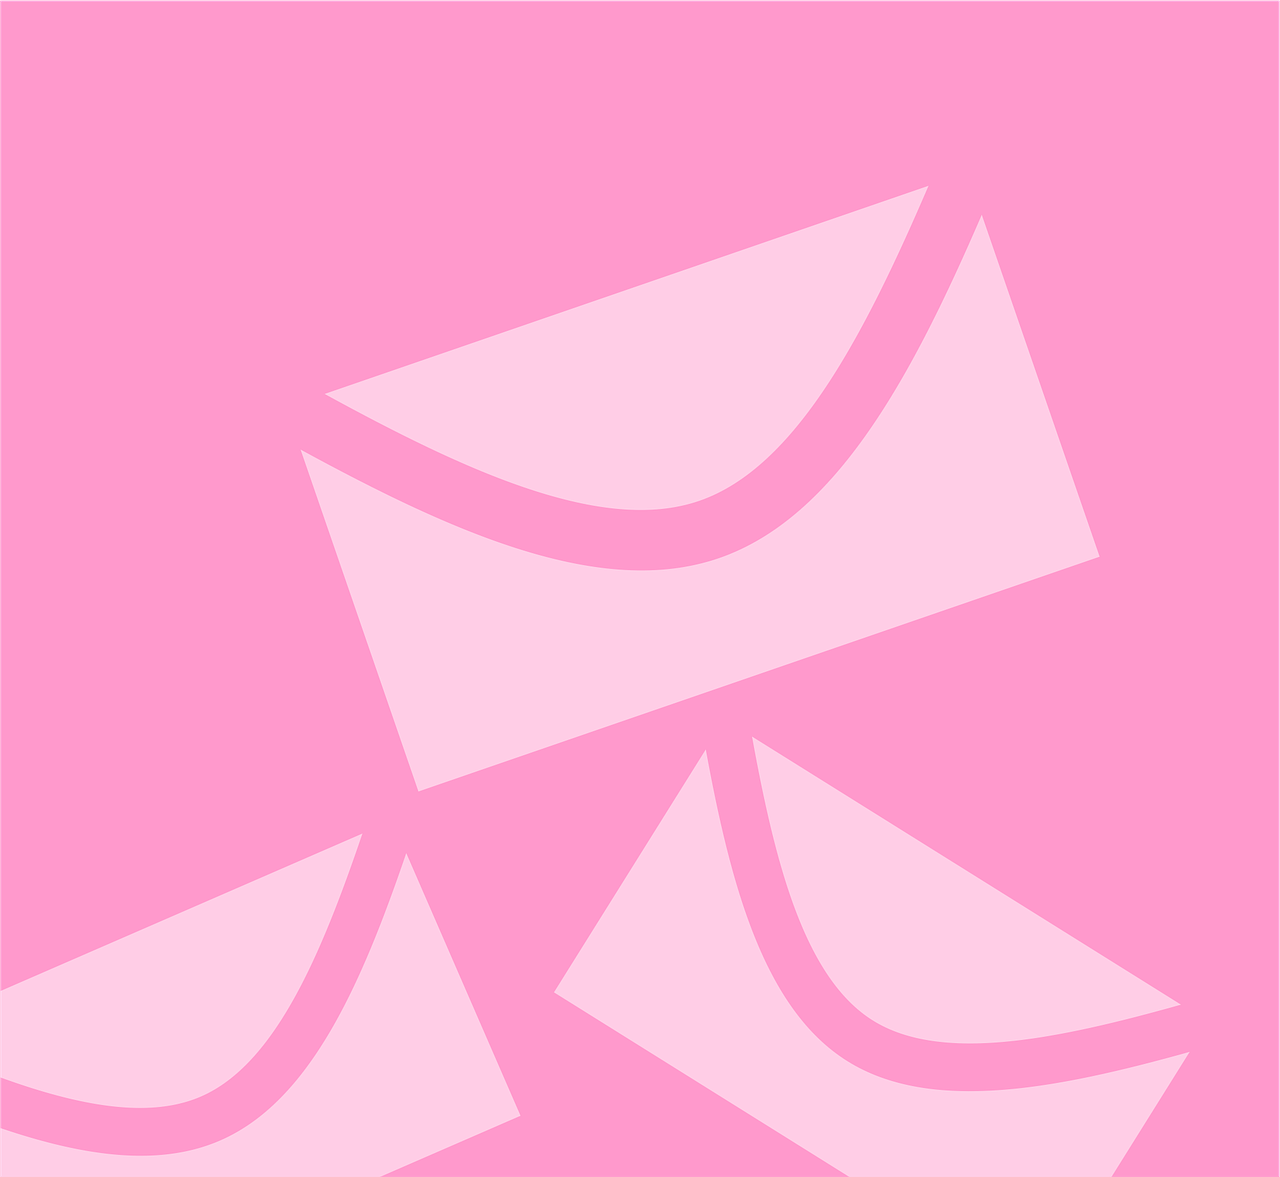 a couple of envelopes sitting on top of each other, an illustration of, postminimalism, soft light 4 k in pink, icon pattern, lolish, everyday plain object